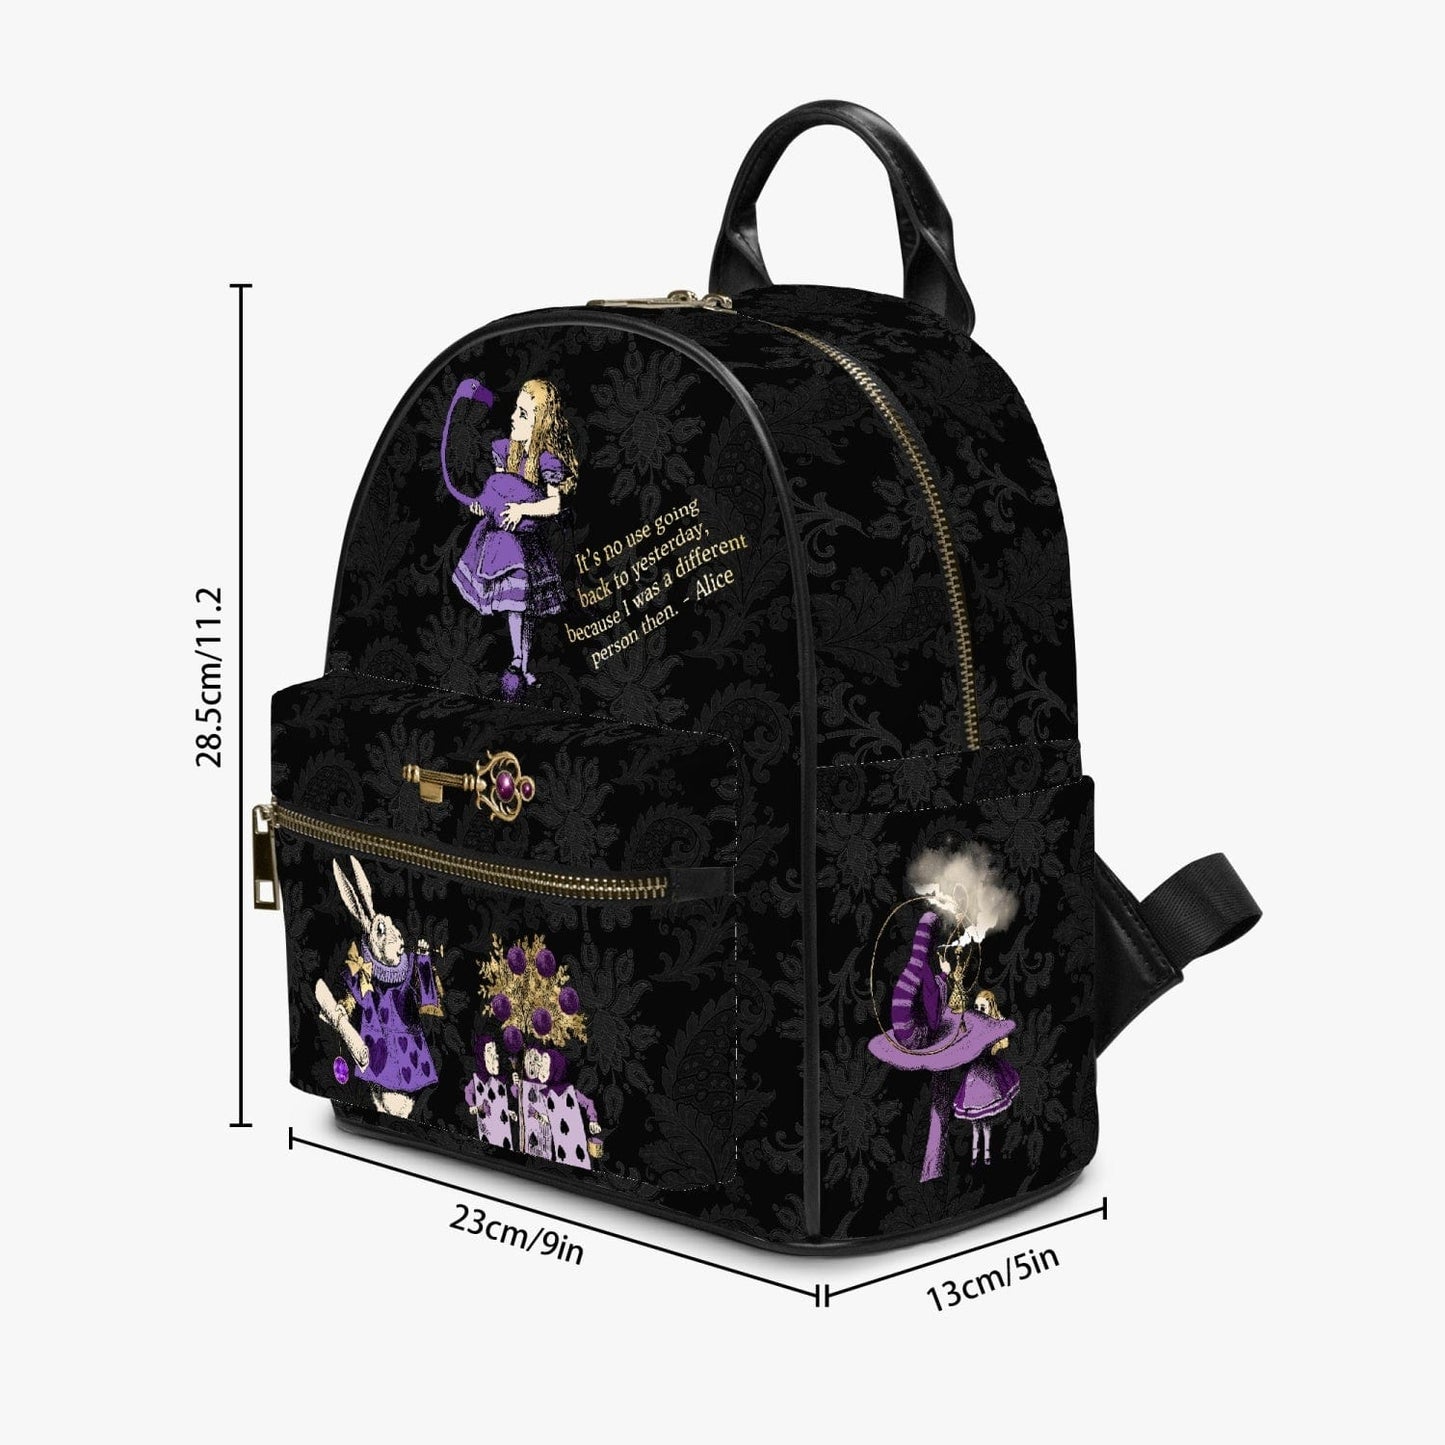 Gothic Alice in Wonderland backpack image showing the dimensions marked beside it